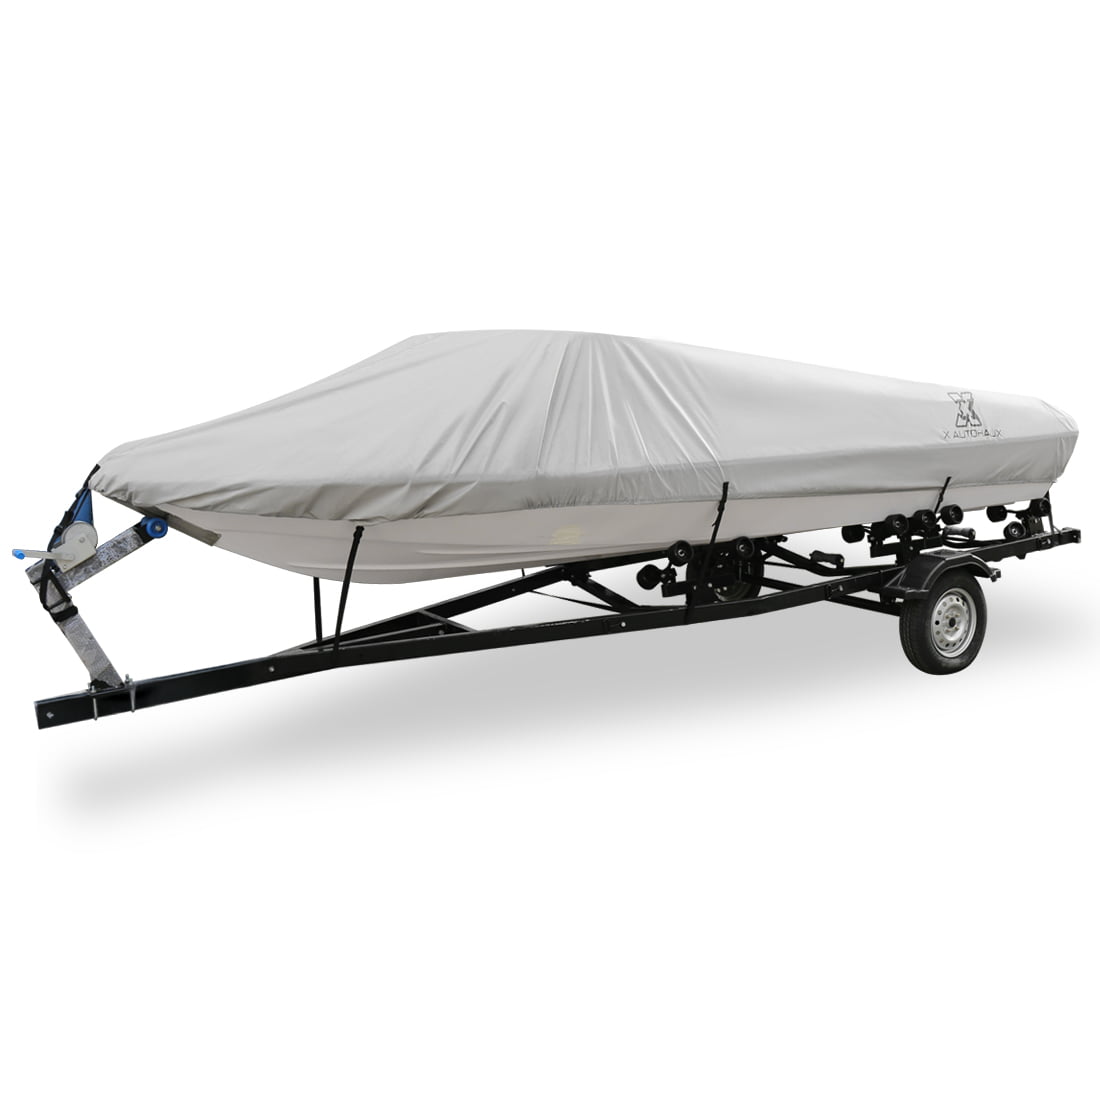 1416ft 90" 300D Polyester Boat Cover Waterproof Gray VHull Protector Walmart Canada